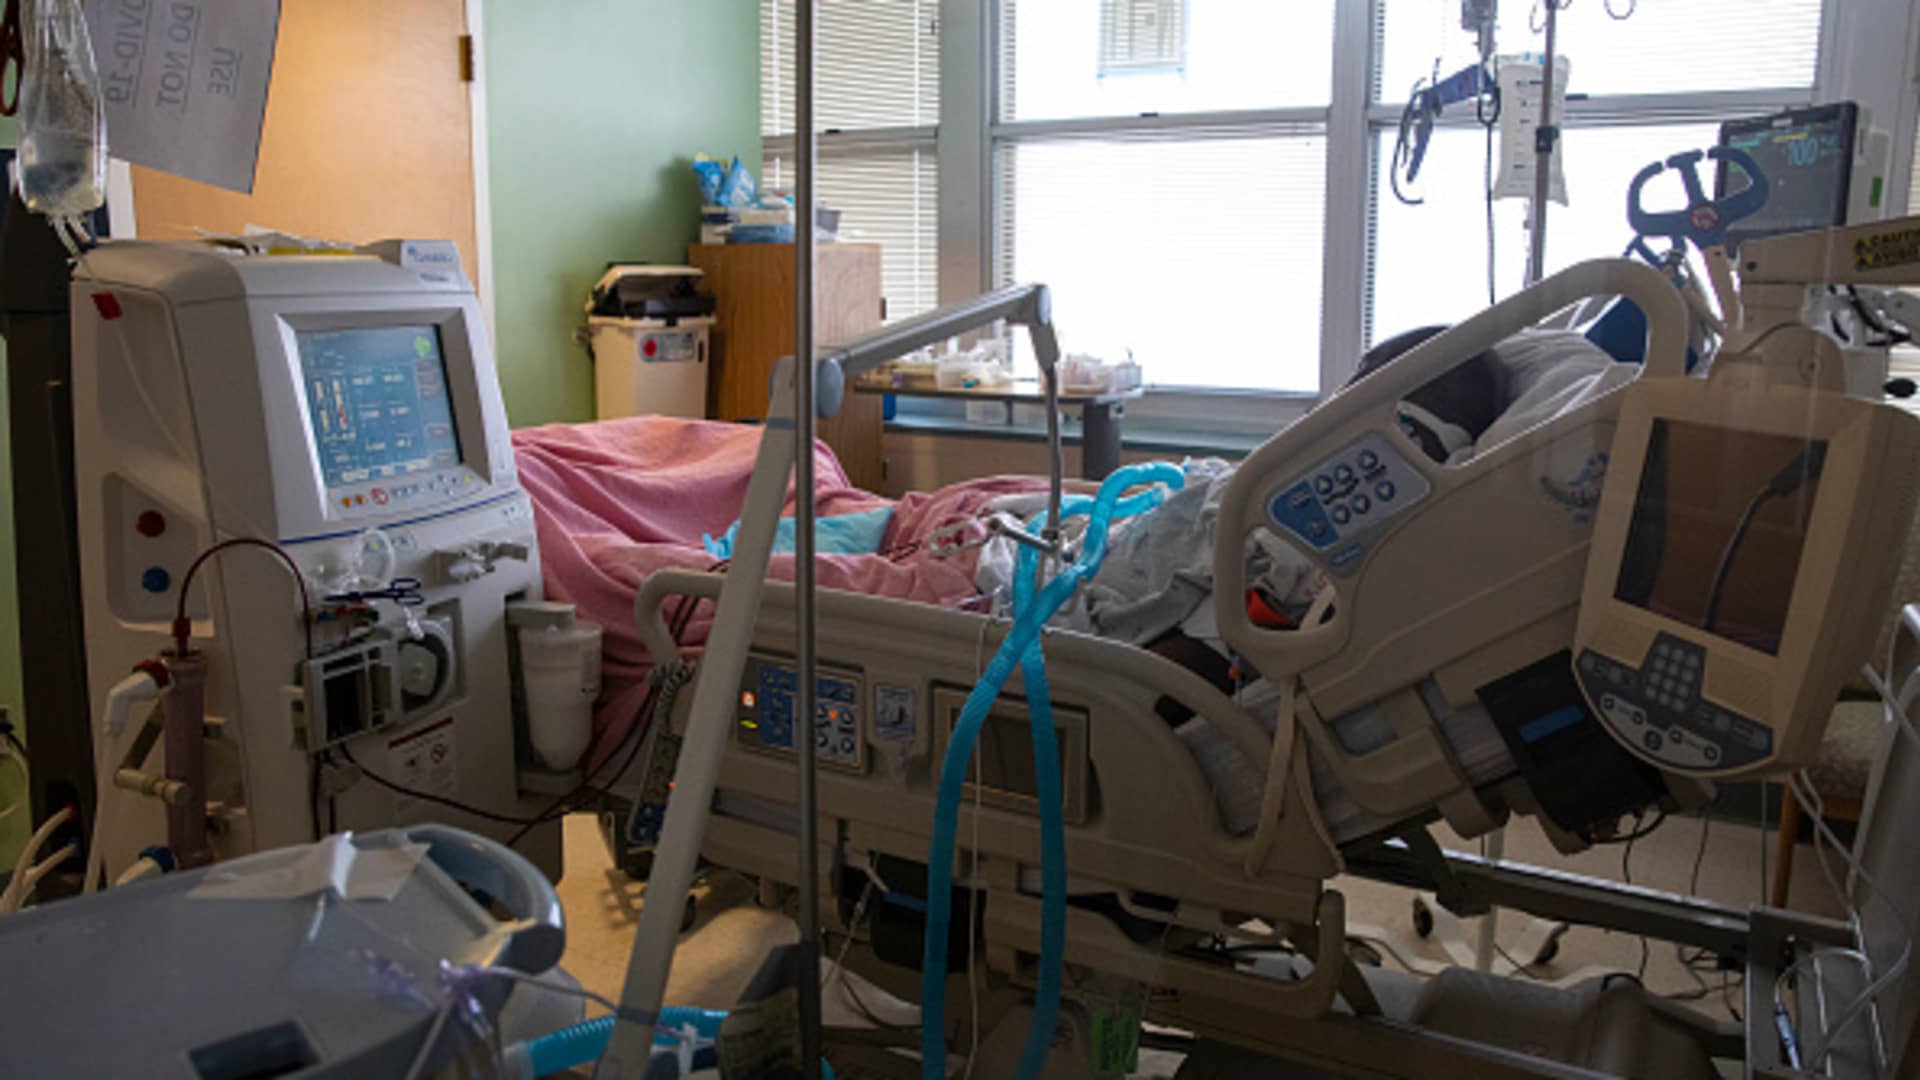 Hispanic dialysis patients face 40% higher risk of staph infection than whites, CDC says